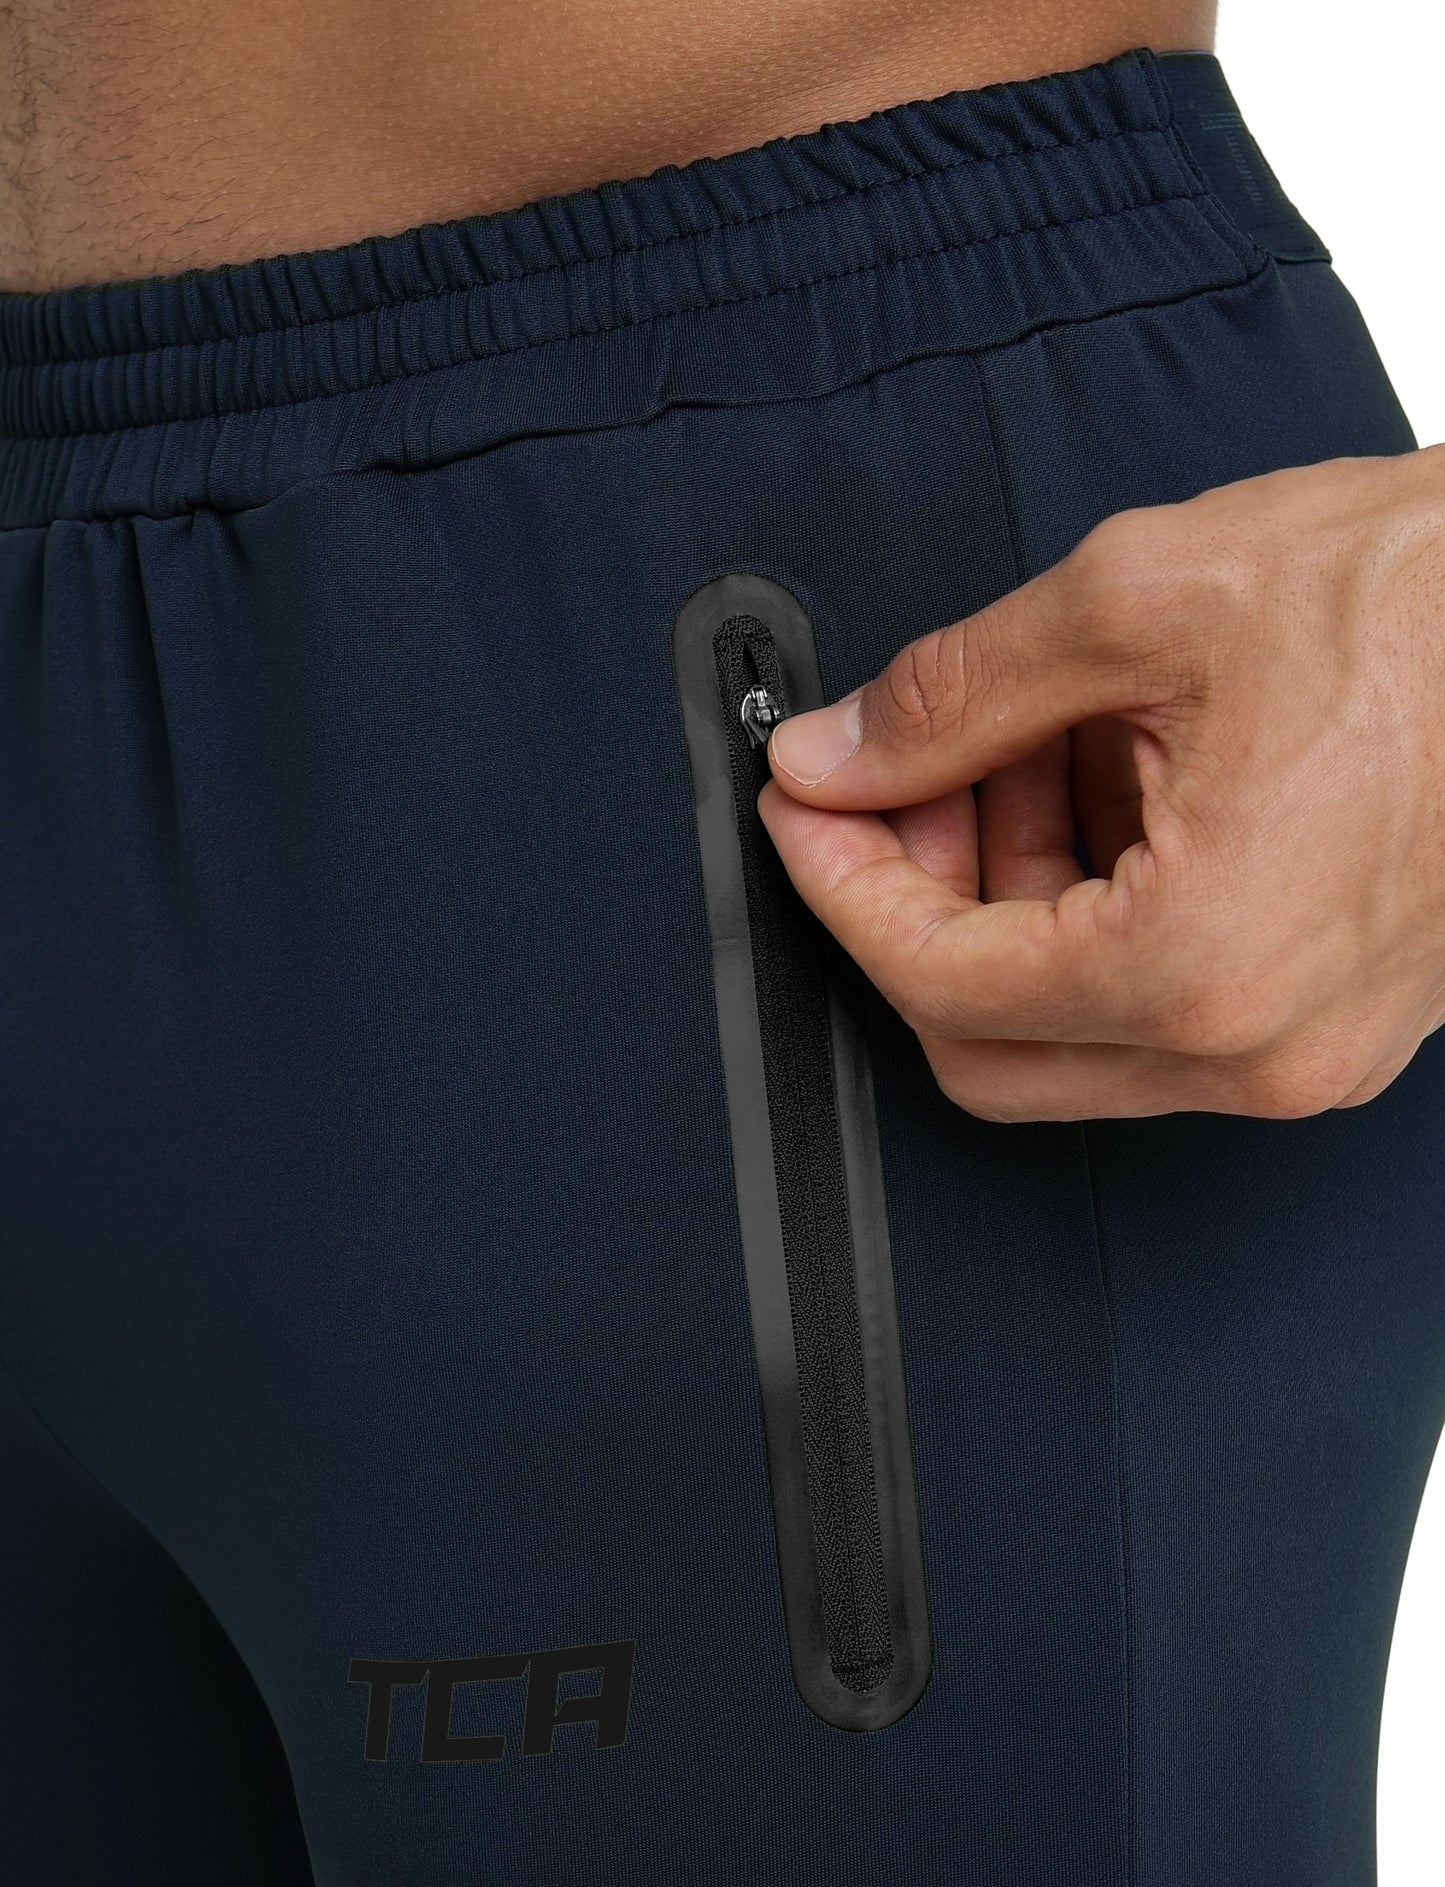 Rapid Trackpant For Men With Zip Pockets